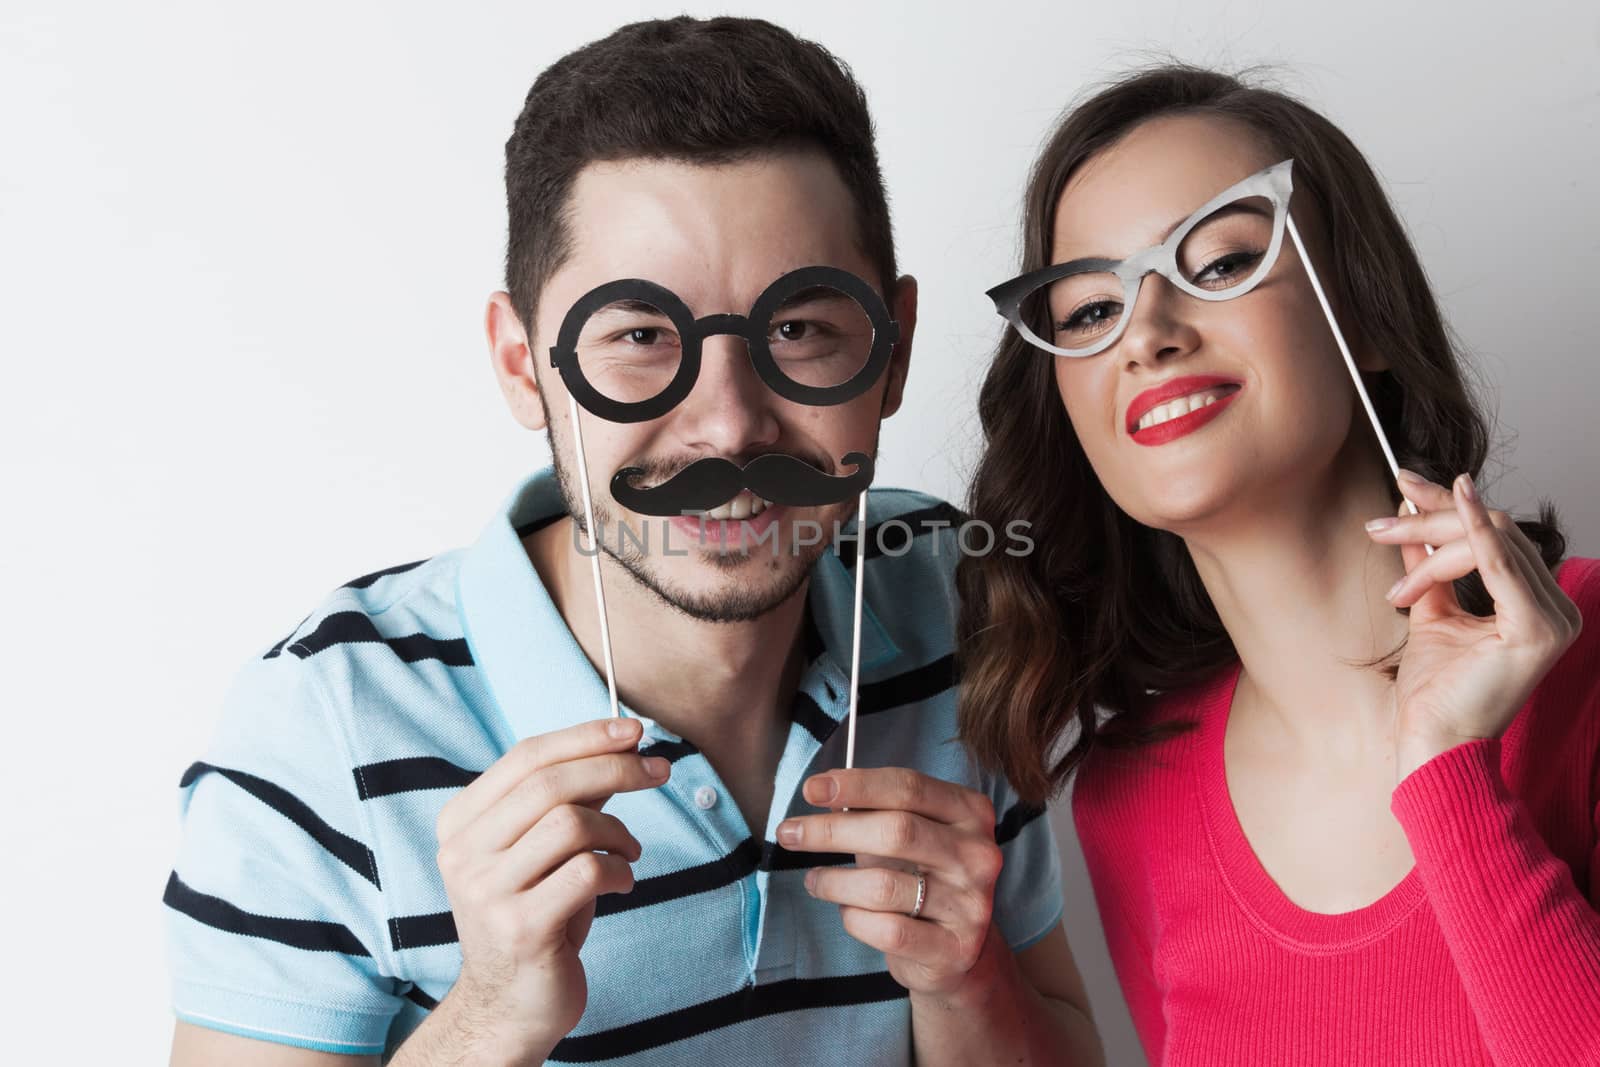 Funny couple holding party glasses and mustaches on sticks